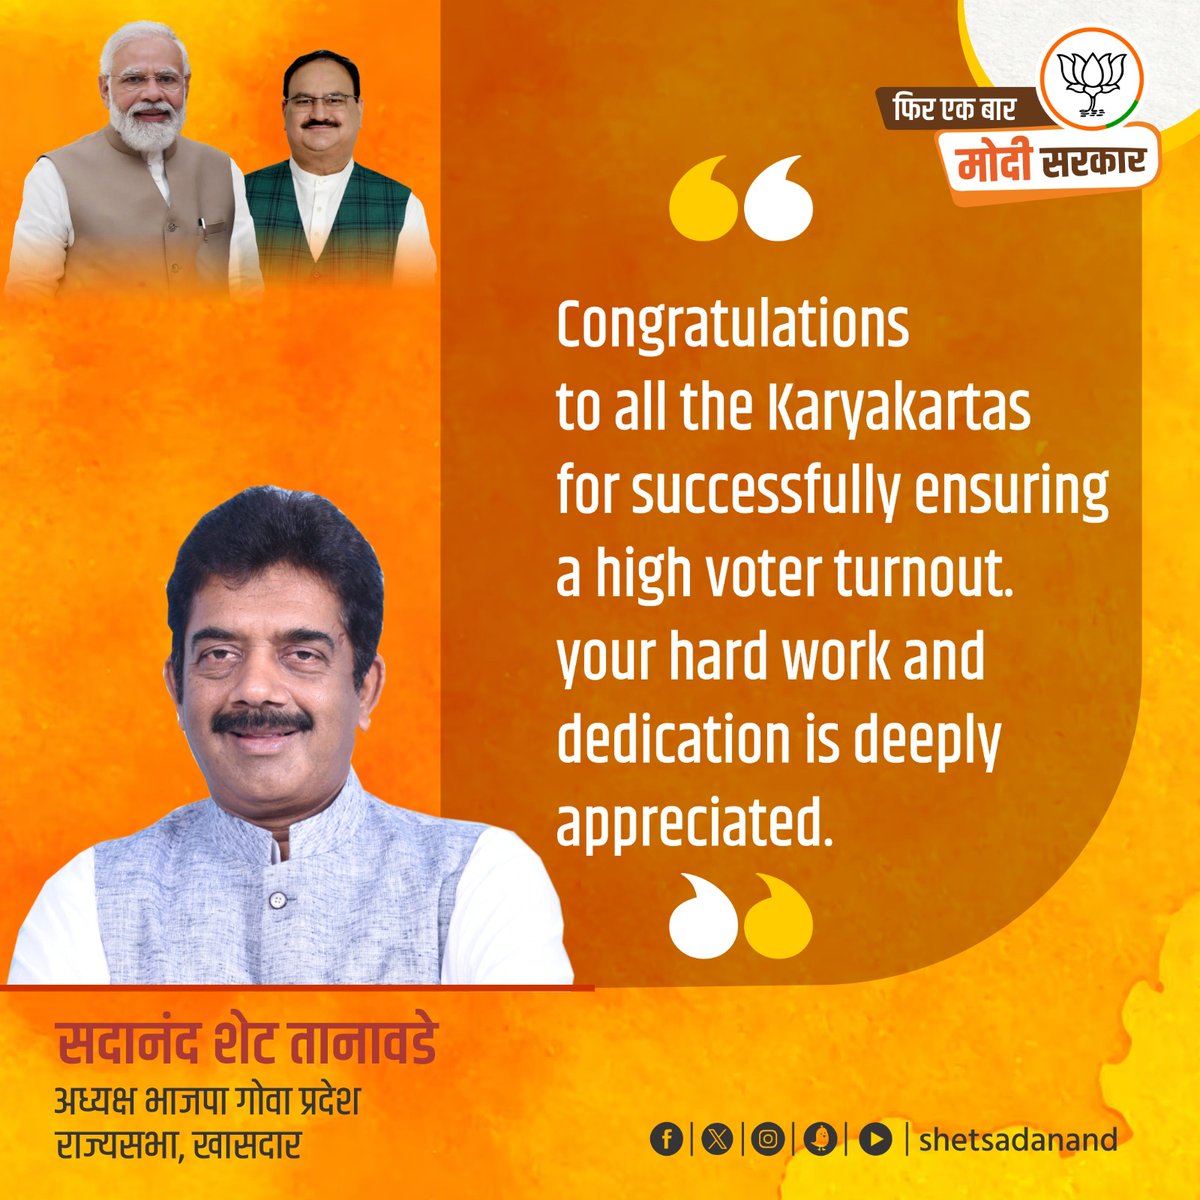 Today's voting has concluded on a positive note, with Goa witnessing a good voter turnout. People across Goa have voted for Viksit Bharat. My sincere thanks to all our hardworking Karyakartas, Panna Pramukhs, Mandal, District, and State teams who have been working diligently for…